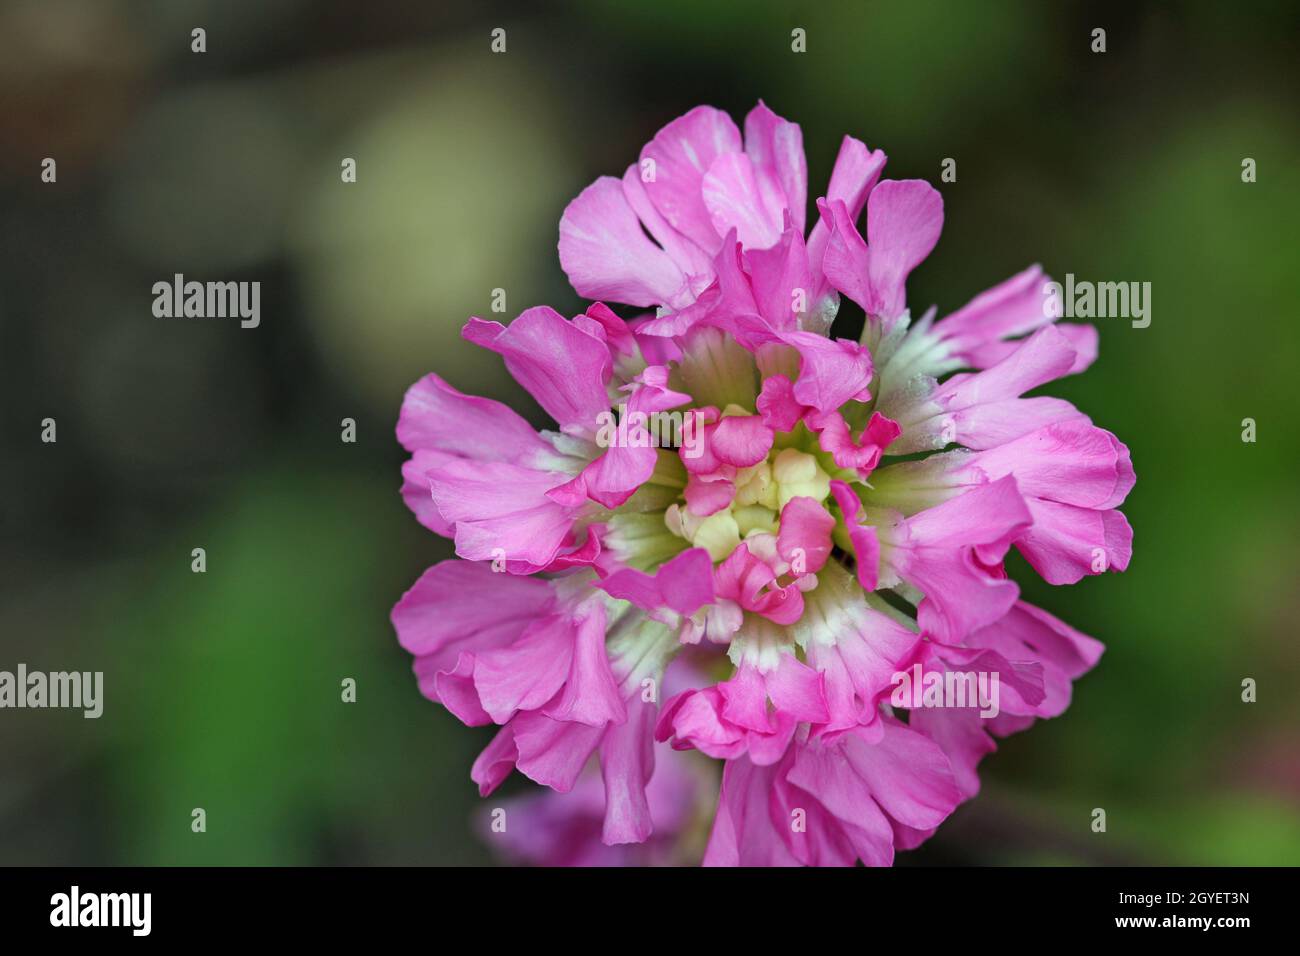 Pink sticky or german catchfly, Lychnis viscaria variety Splendens Plena, flowers with a blurred background of leaves. Stock Photo